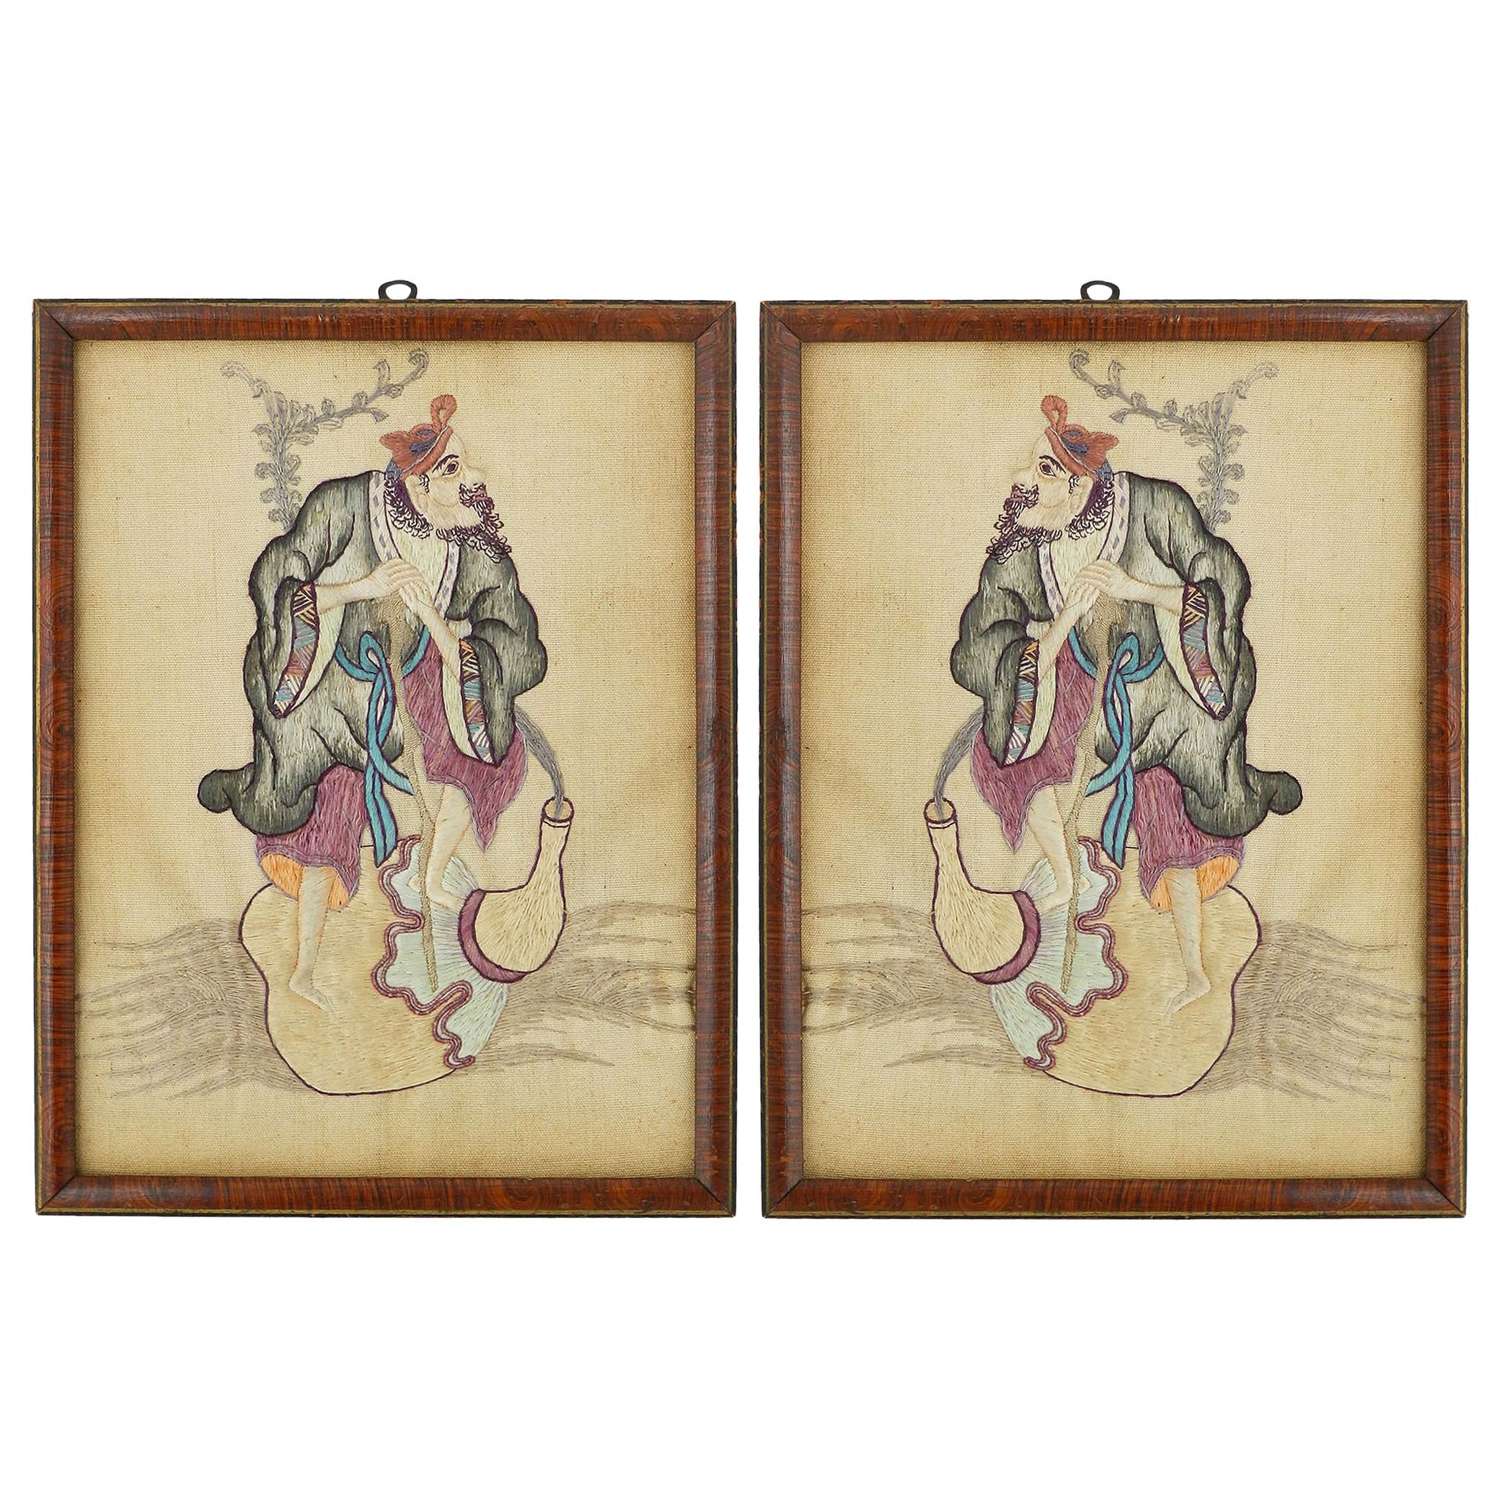 Pair of Embroidered Chinoiserie Panels of a Gentleman Early 20th Century